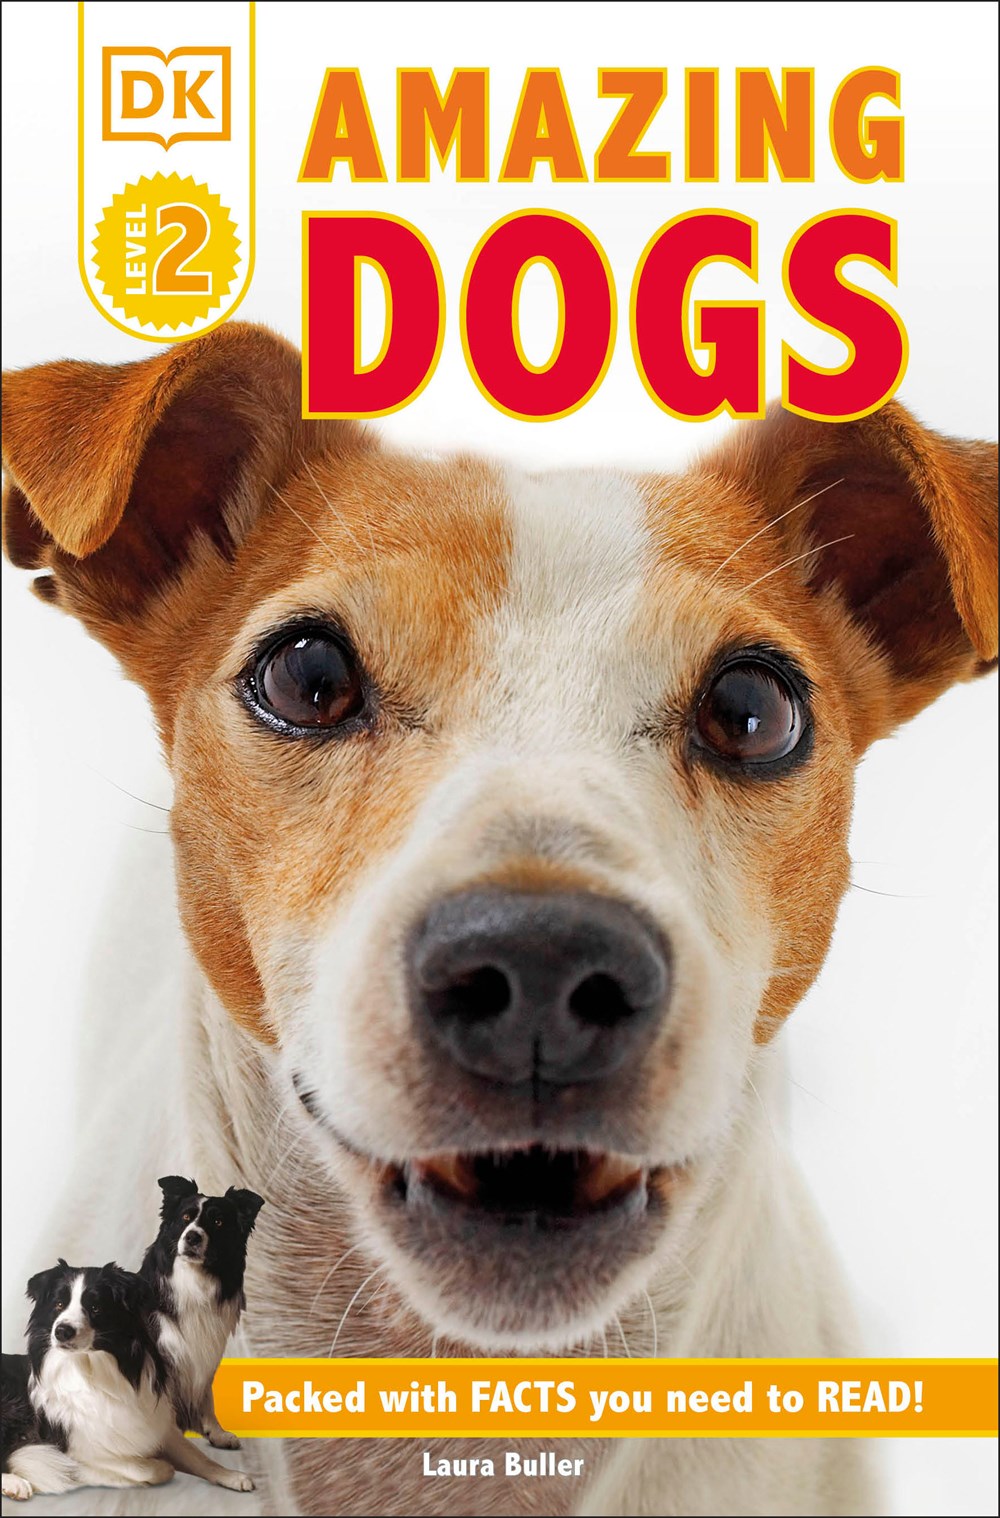 Amazing Dogs (DK Readers L2)